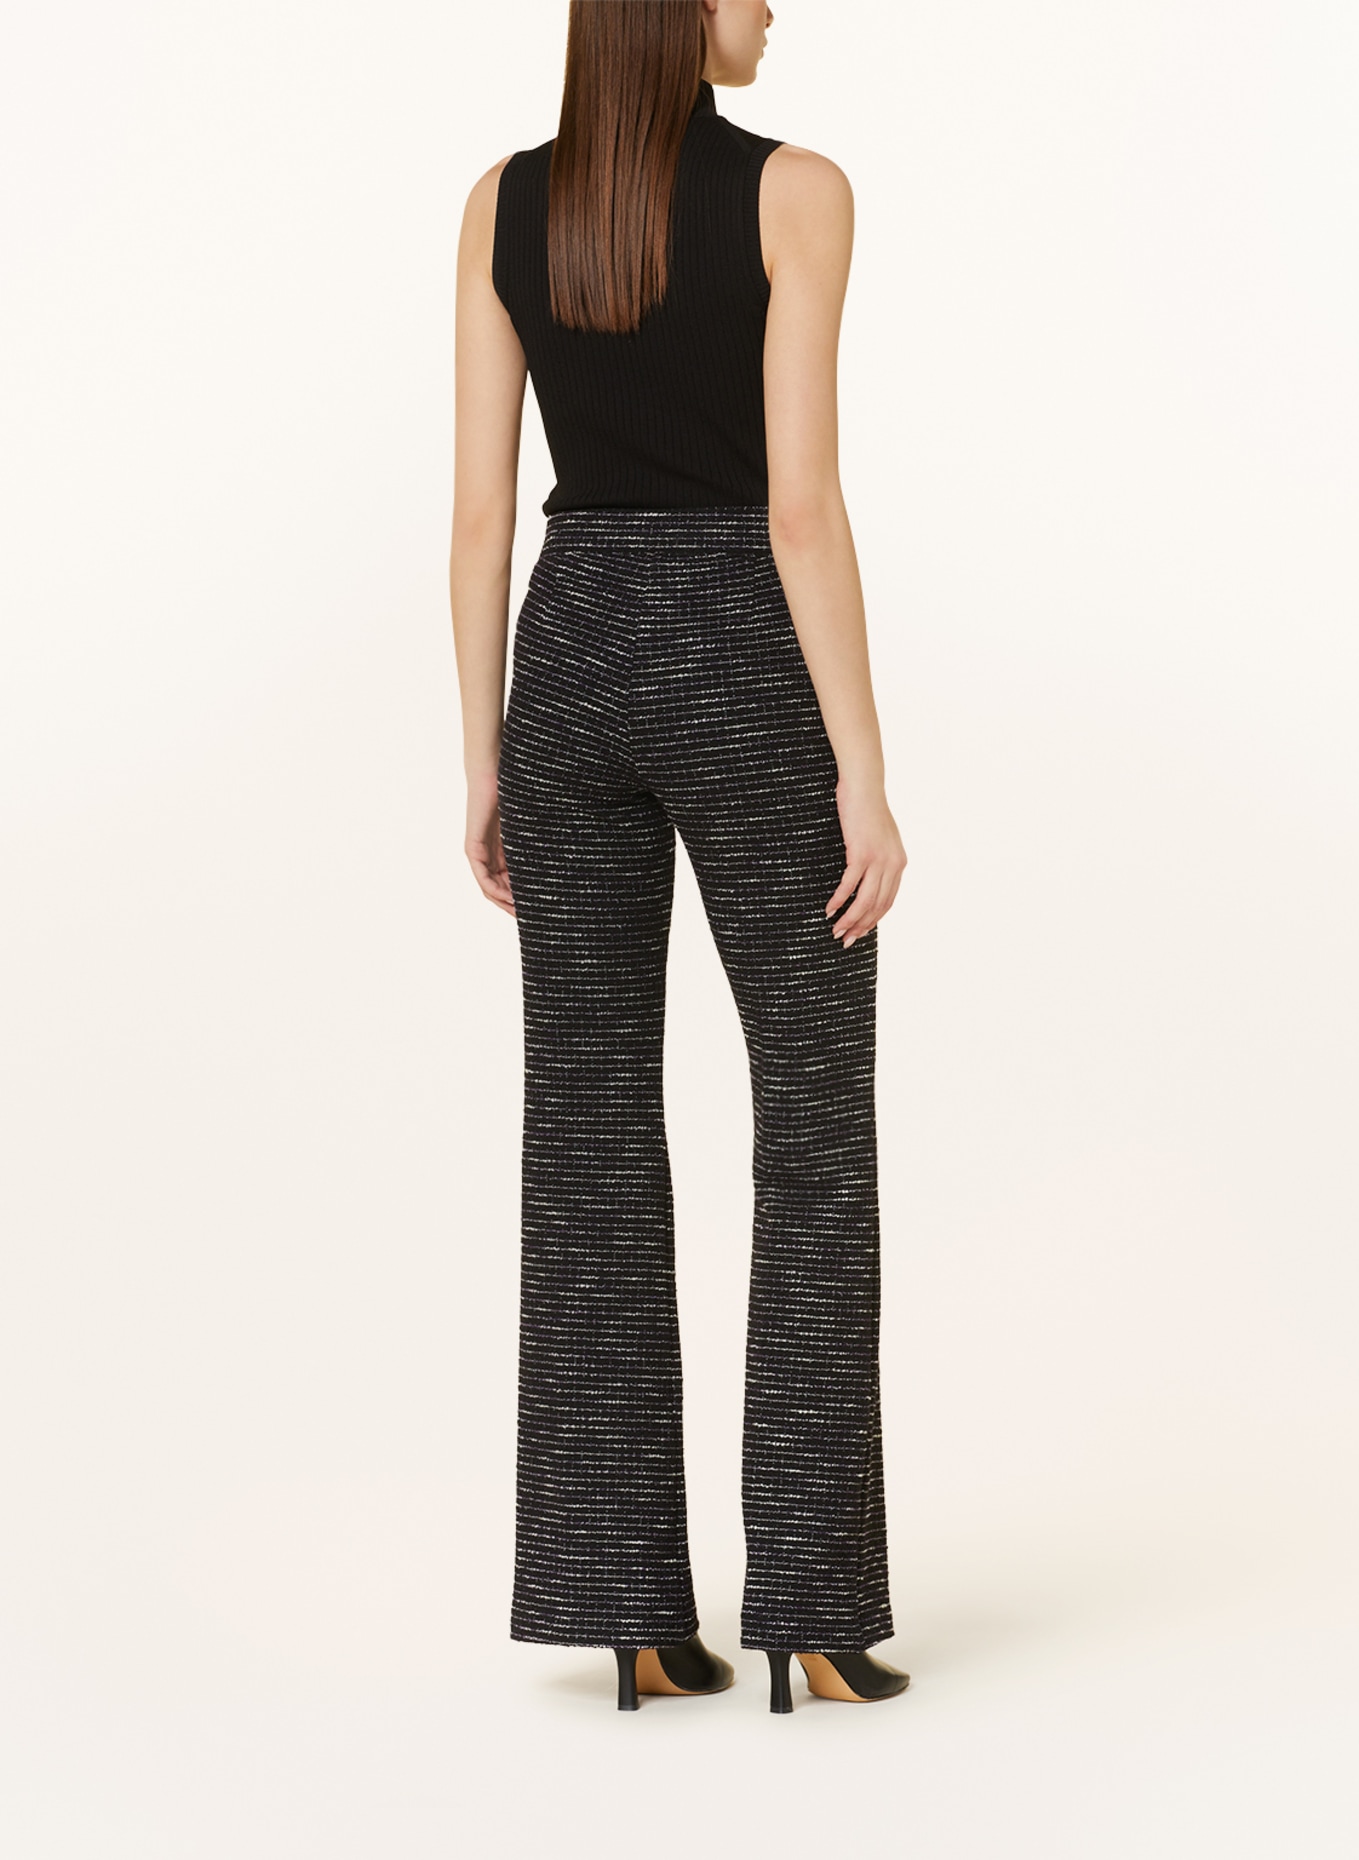 CAMBIO Wide leg trousers FRANCIS made of tweed, Color: BLACK/ WHITE/ PURPLE (Image 3)